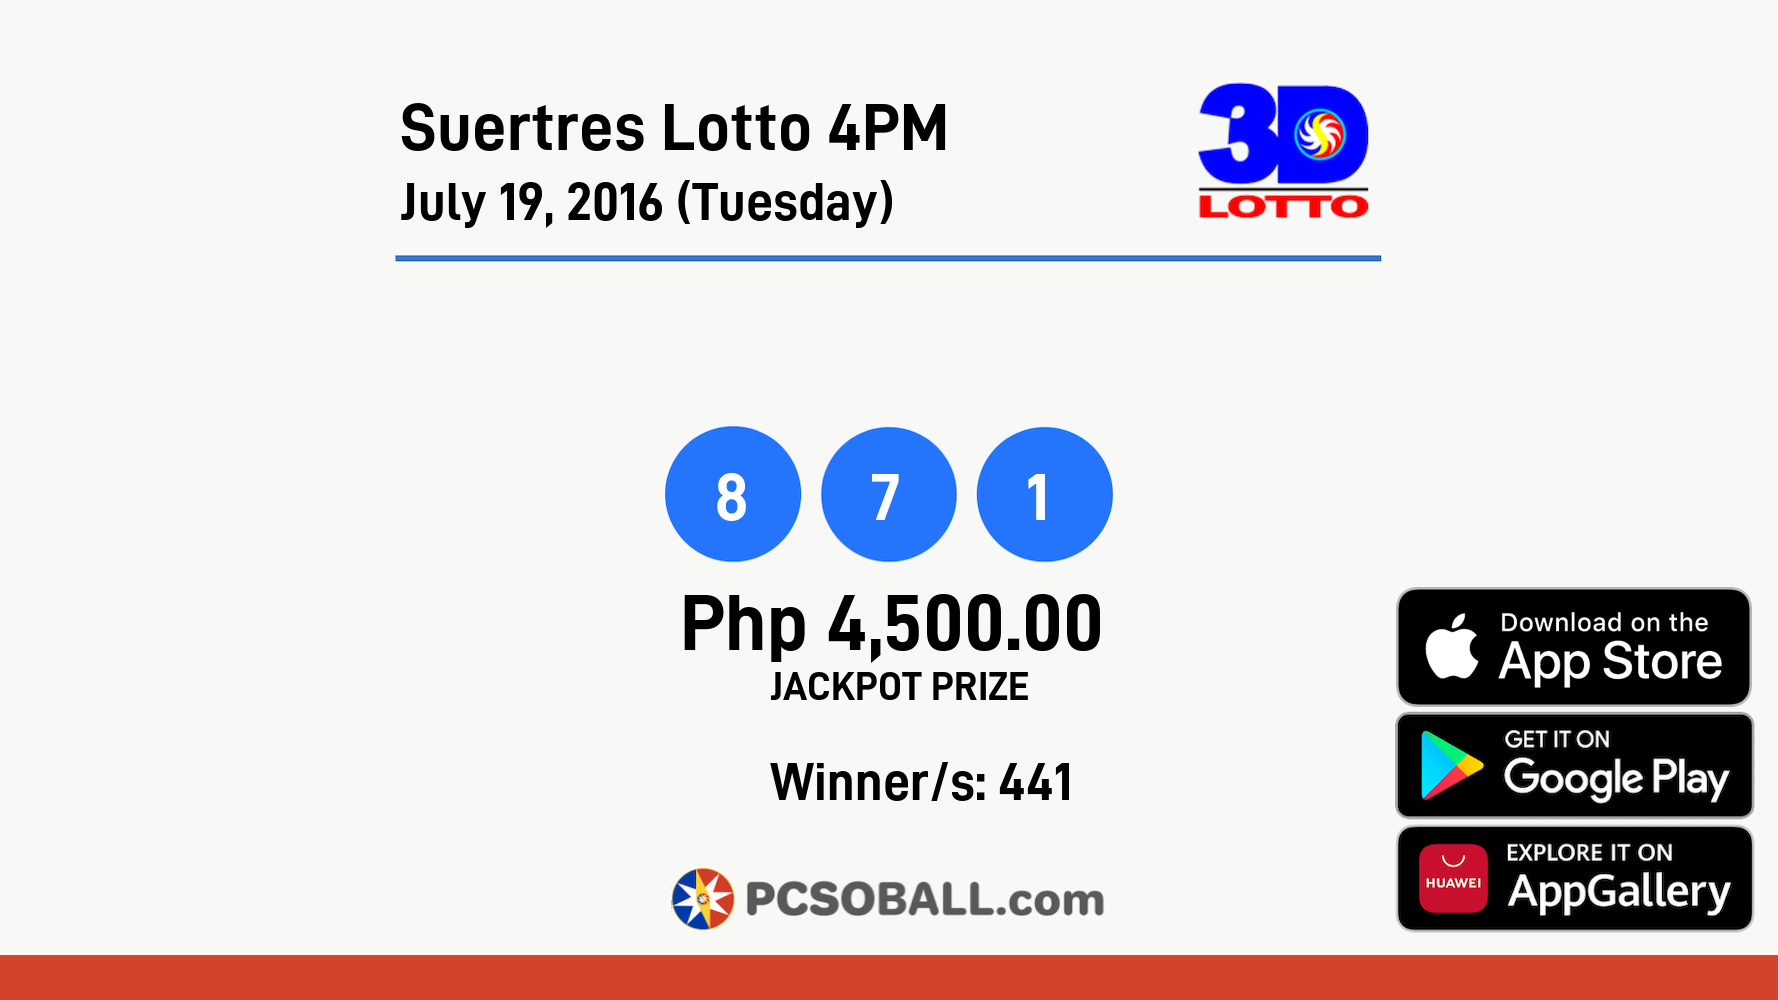 Suertres Lotto 4PM July 19, 2016 (Tuesday) Result